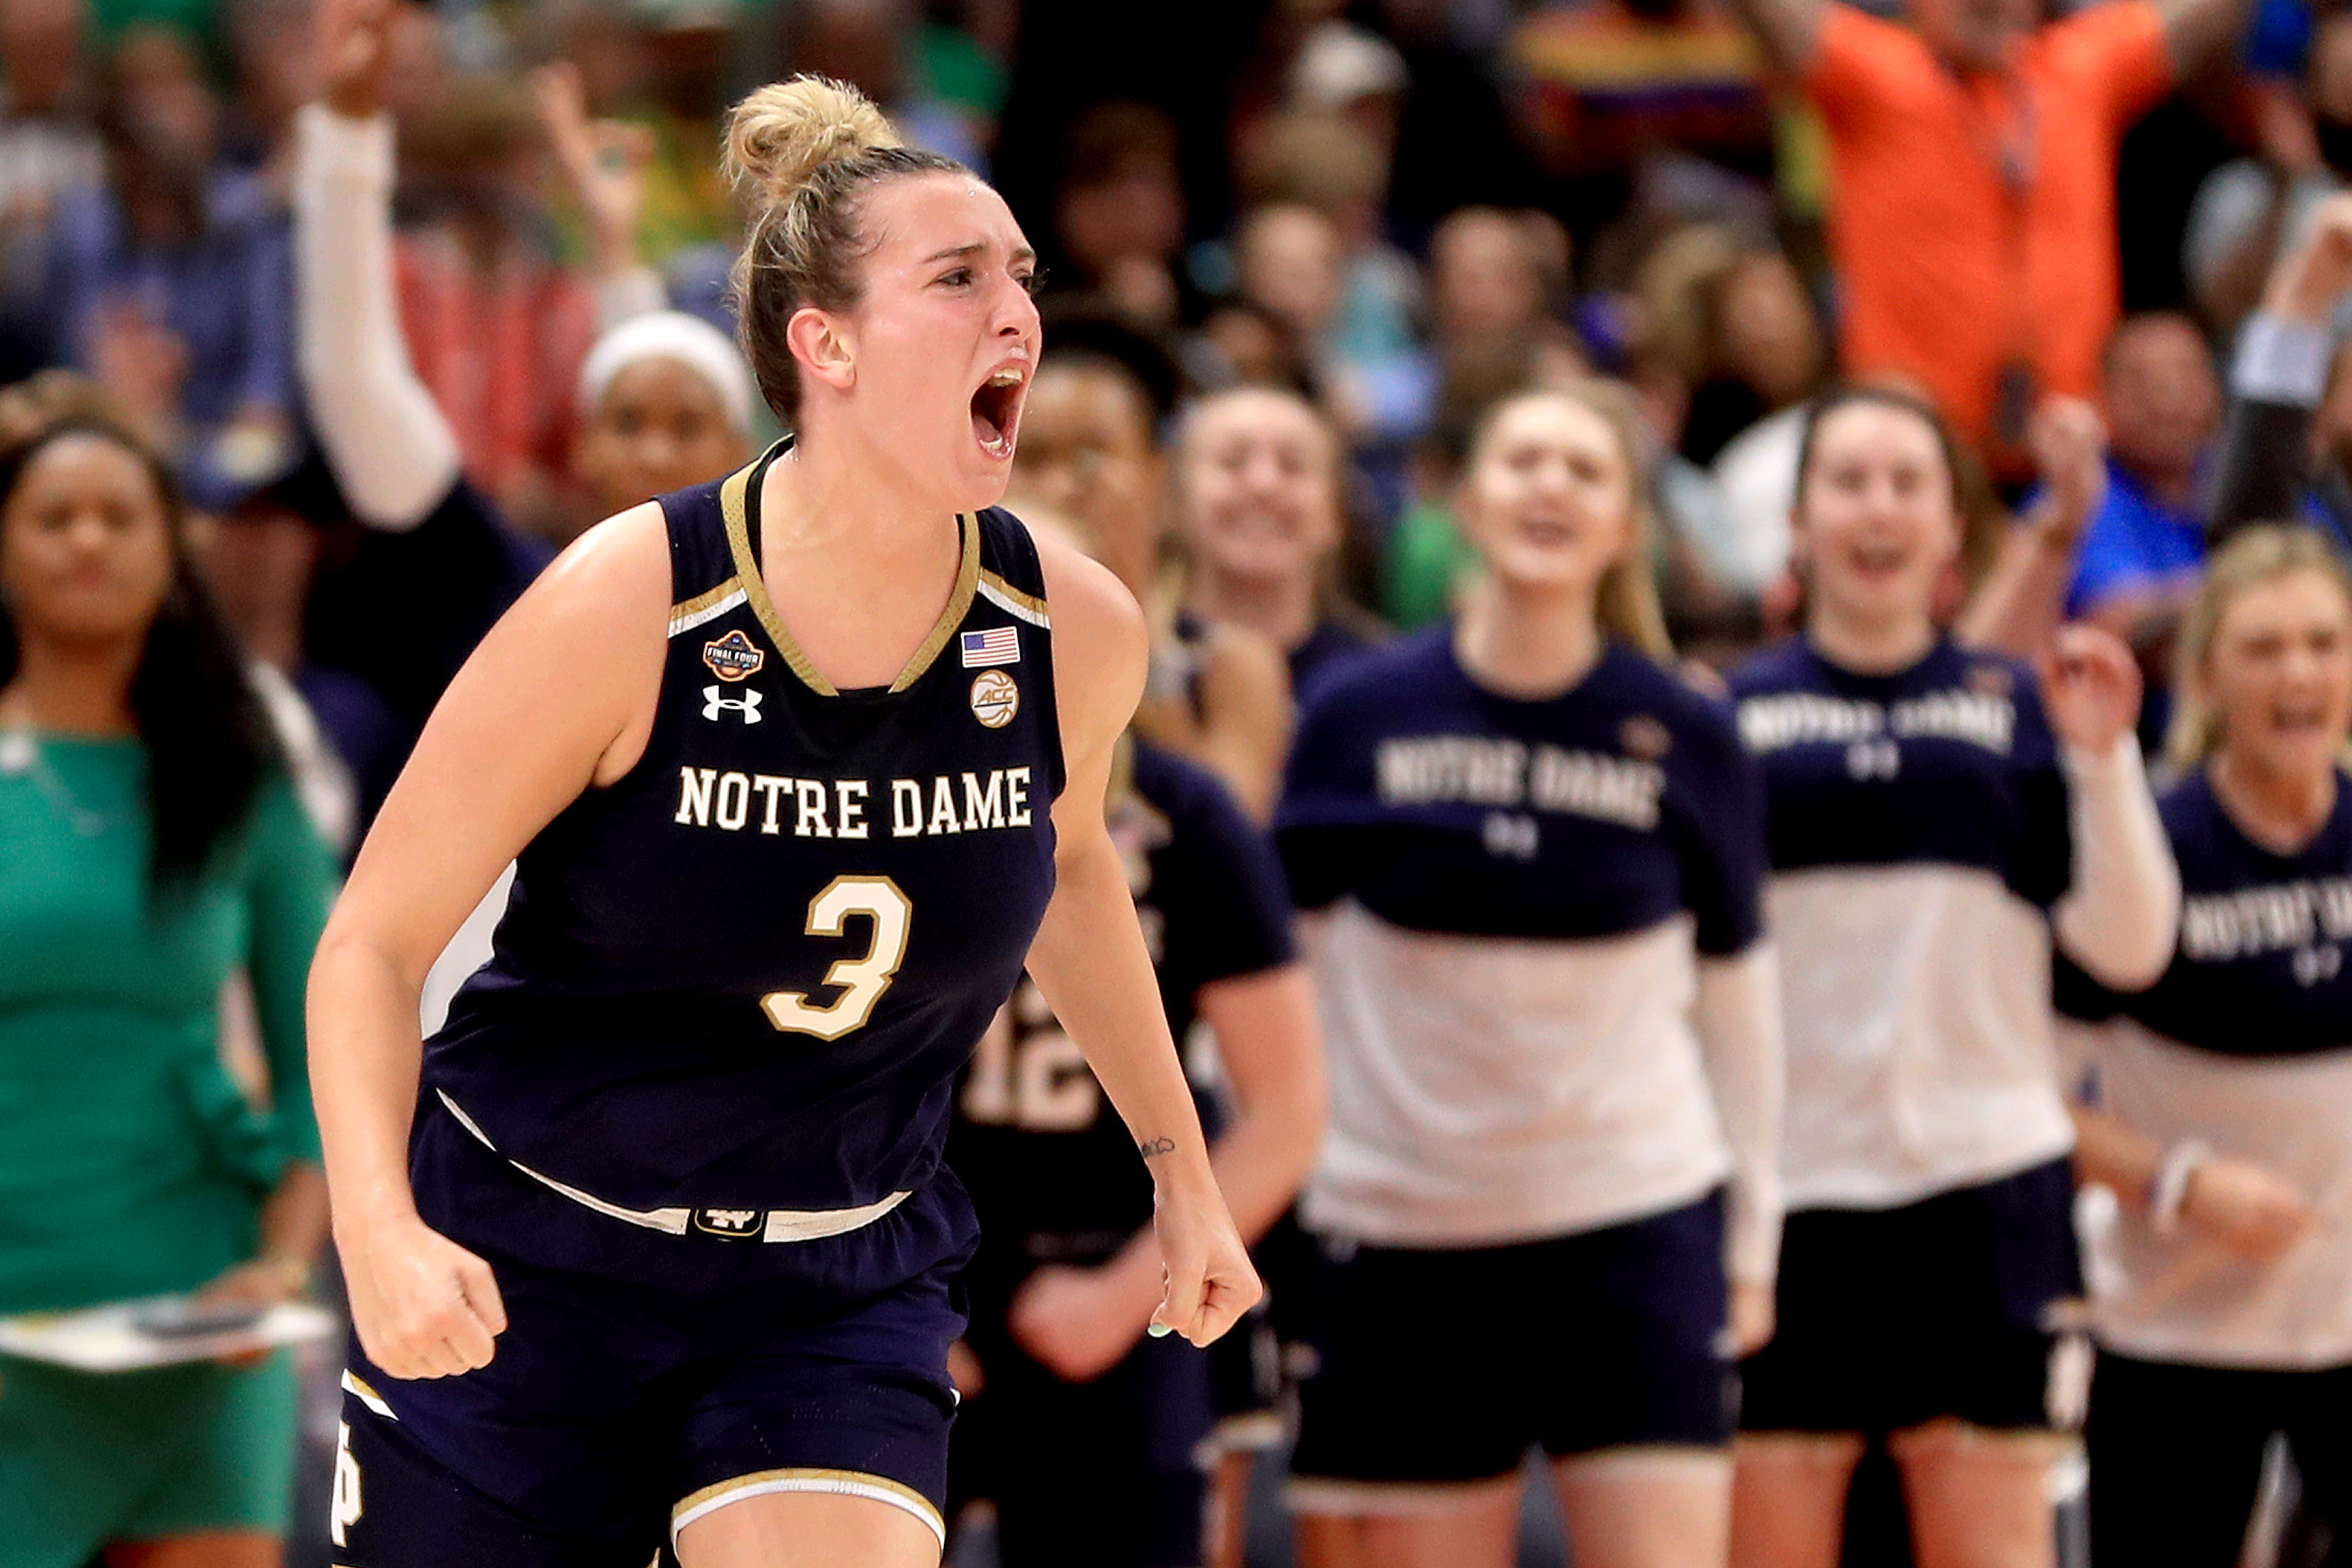 Highlight: Notre Dame's Marina Mabrey ties game with 3 pointer